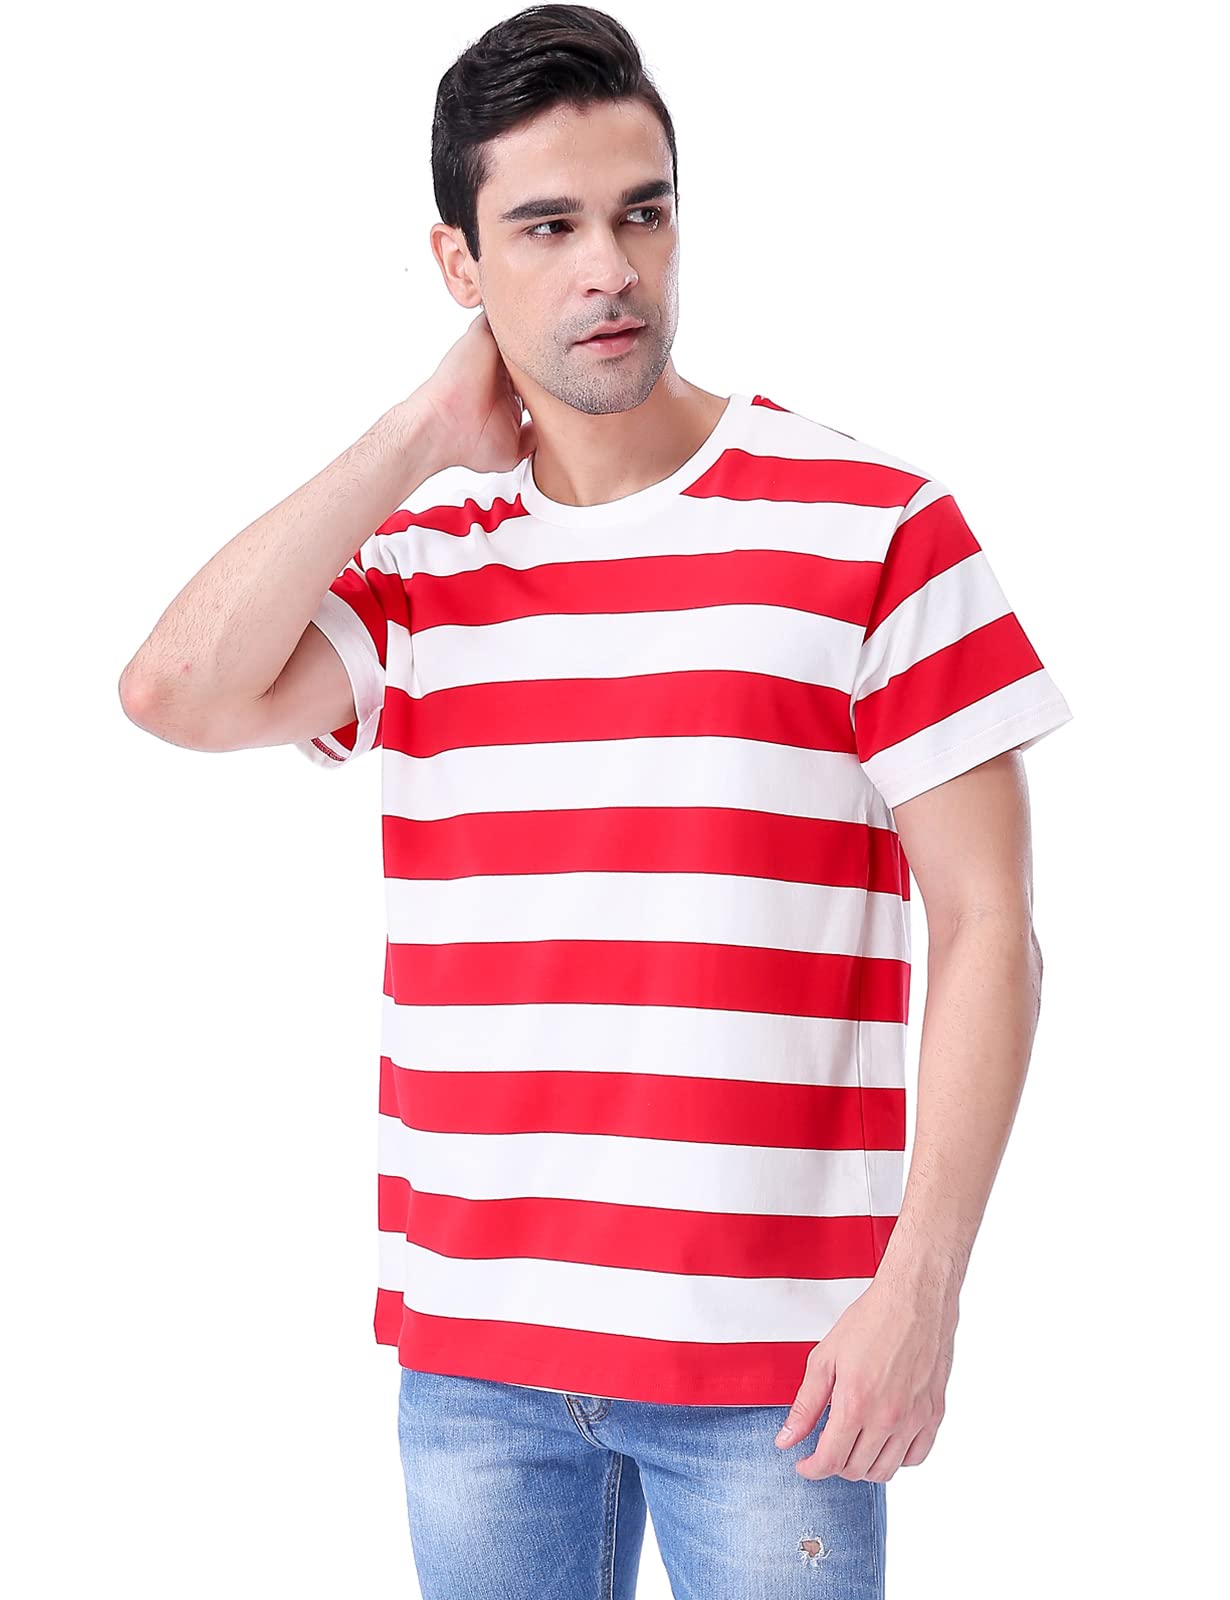 Funny World Men's Cotton Striped T-Shirt Crew Neck Short Sleeves Basic Casual Top